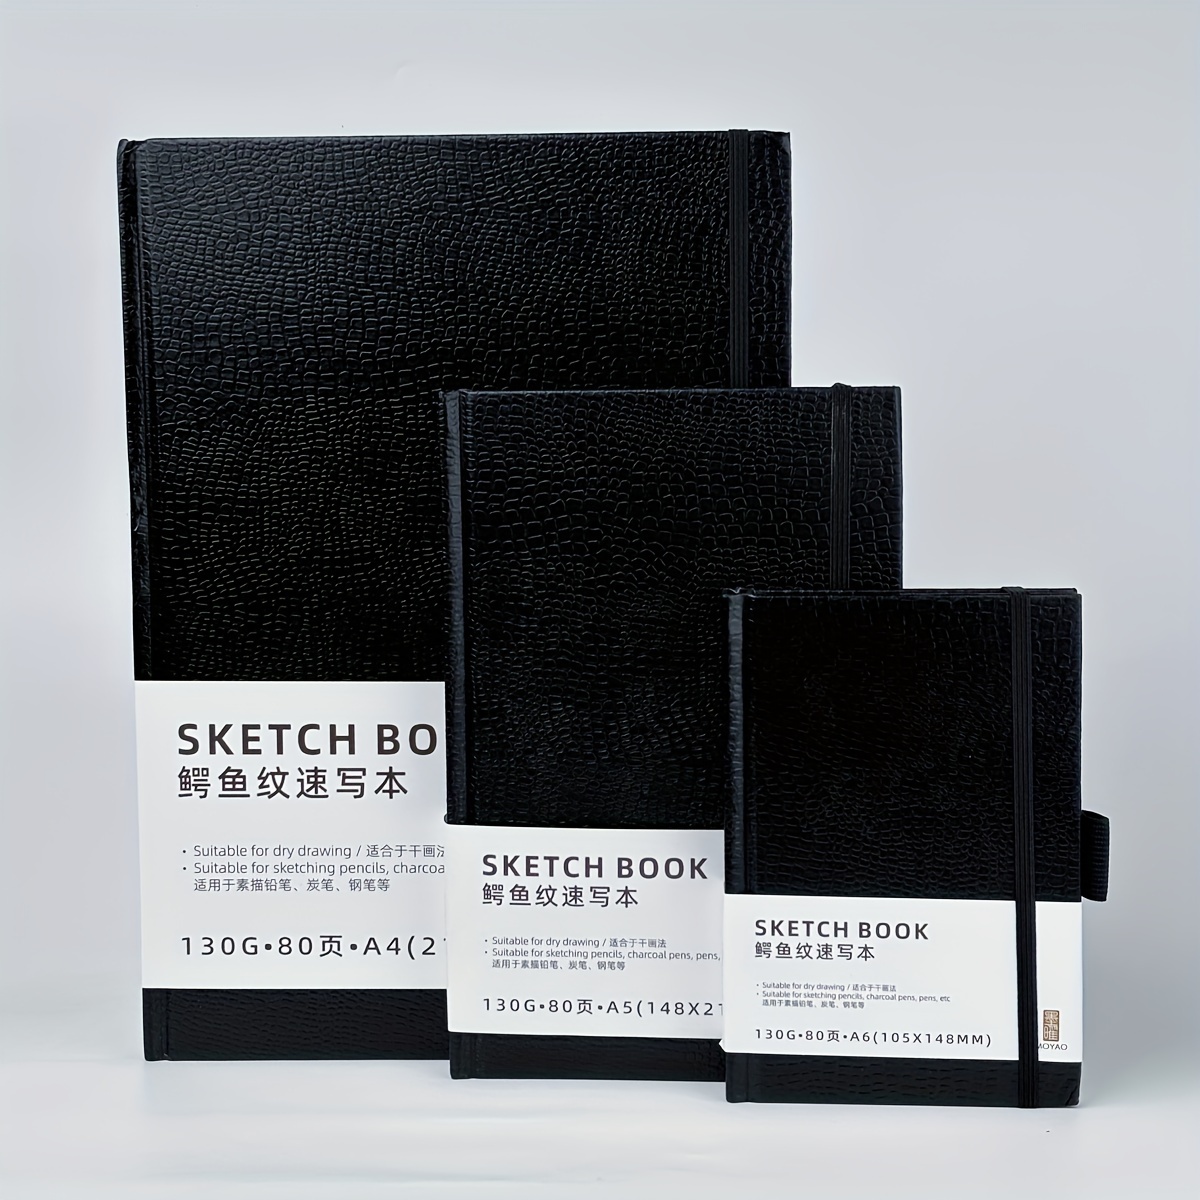 

Sketchbook Marker Paper Pad: 5.8"x8.2" Square Art Sketch Book Drawing Papers 80 Sheets 35 Lbs/130 Gsm Hardcover Sketching Books For Alcohol Markers Heavyweight Sketchpad Christmas Gift